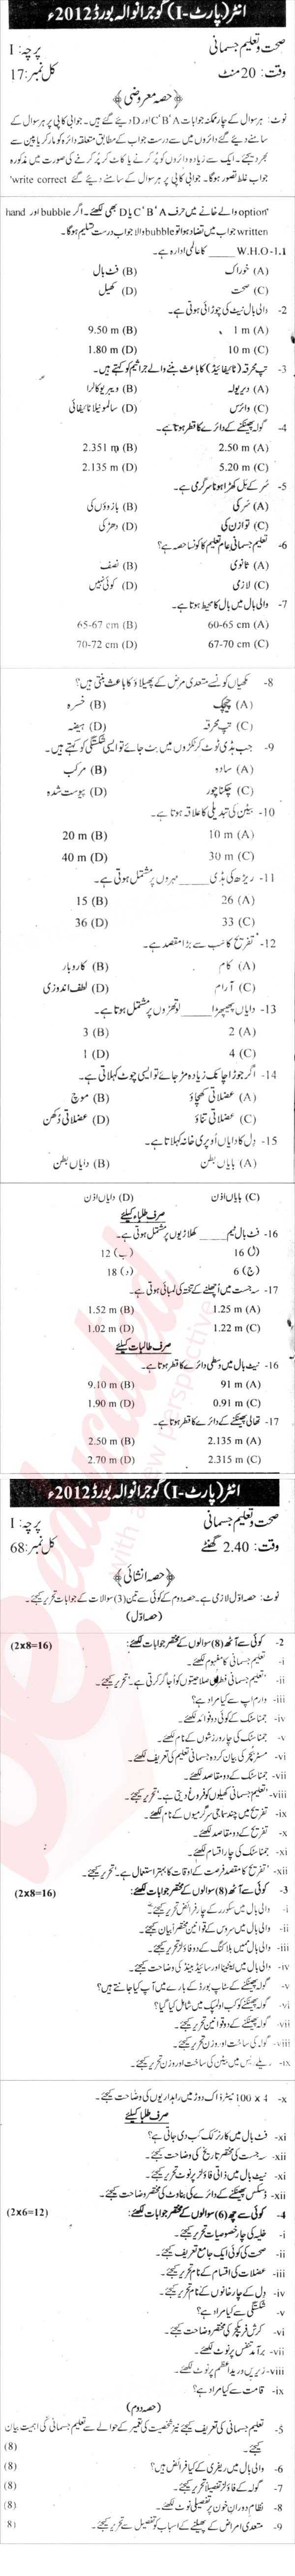 Health and Physical Education FA Part 1 Past Paper Group 1 BISE Gujranwala 2012